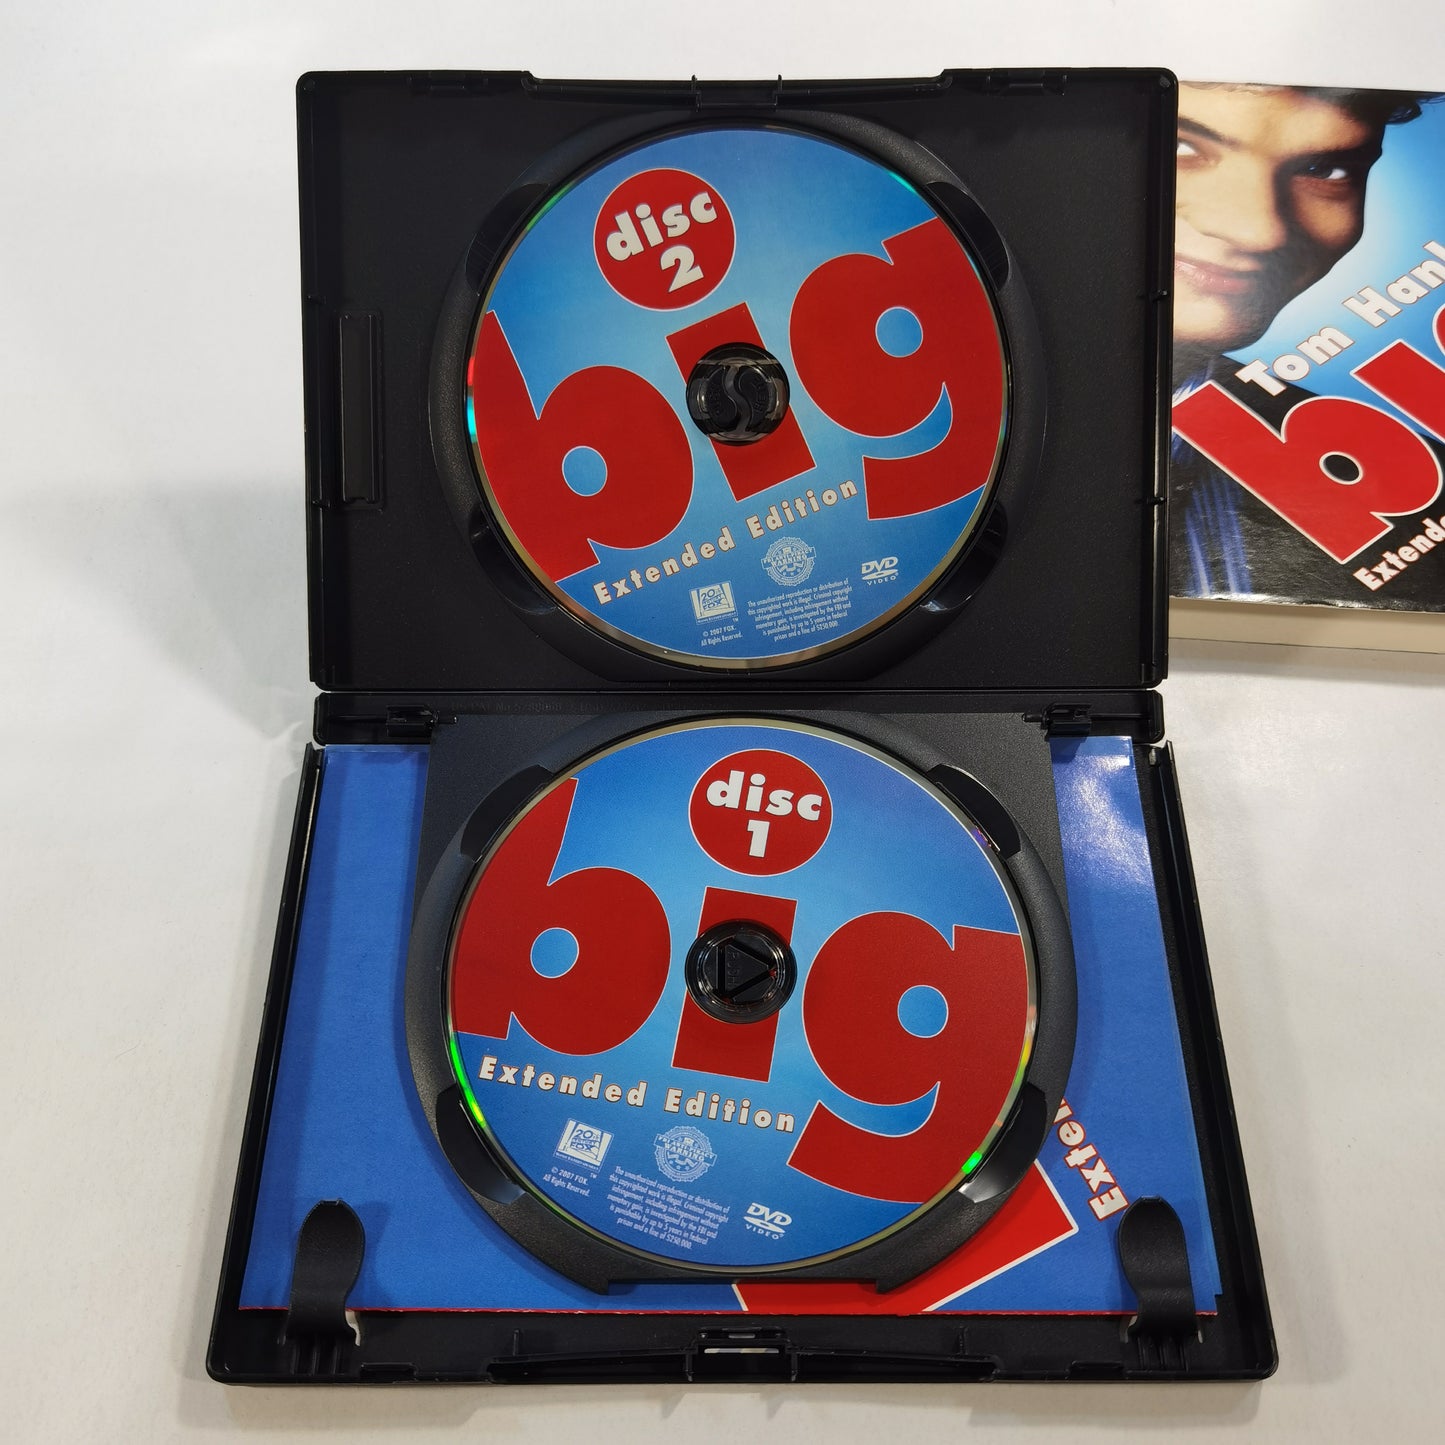 Big (1988) - DVD US 2007 Extended Edition